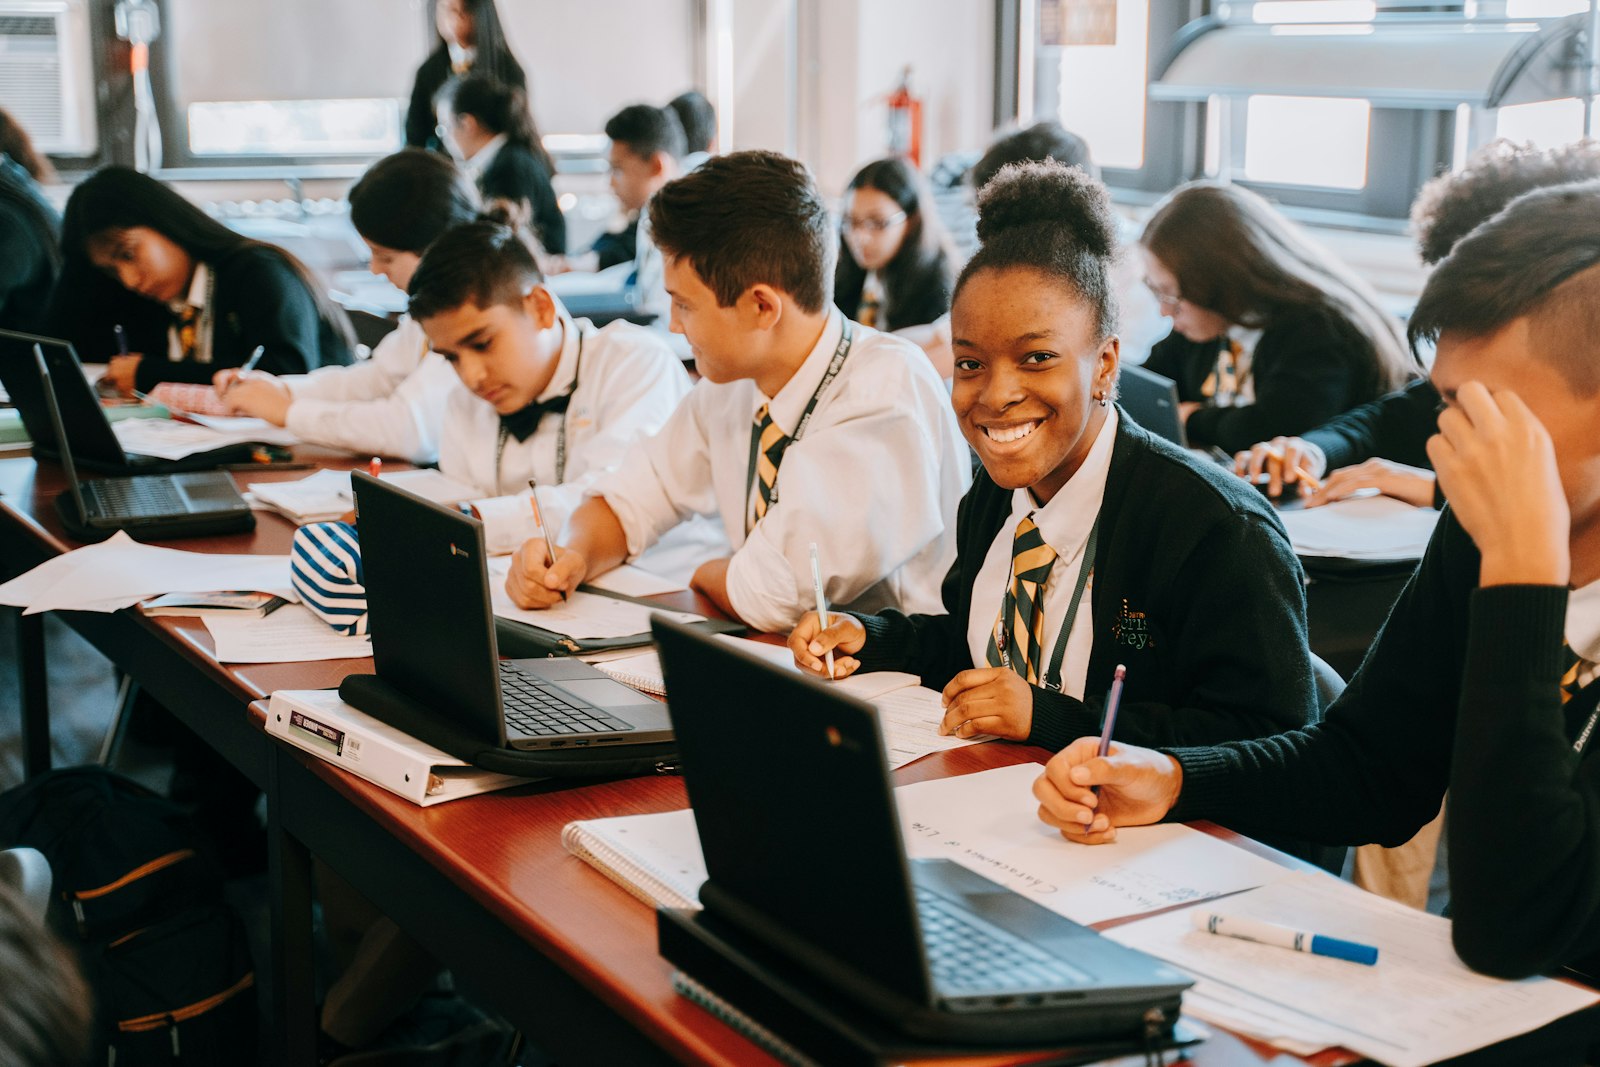 Detroit Cristo Rey High School students work on laptops in October. Local Catholic schools saw a 7 percent enrollment increase last year, and have held steady this academic year.